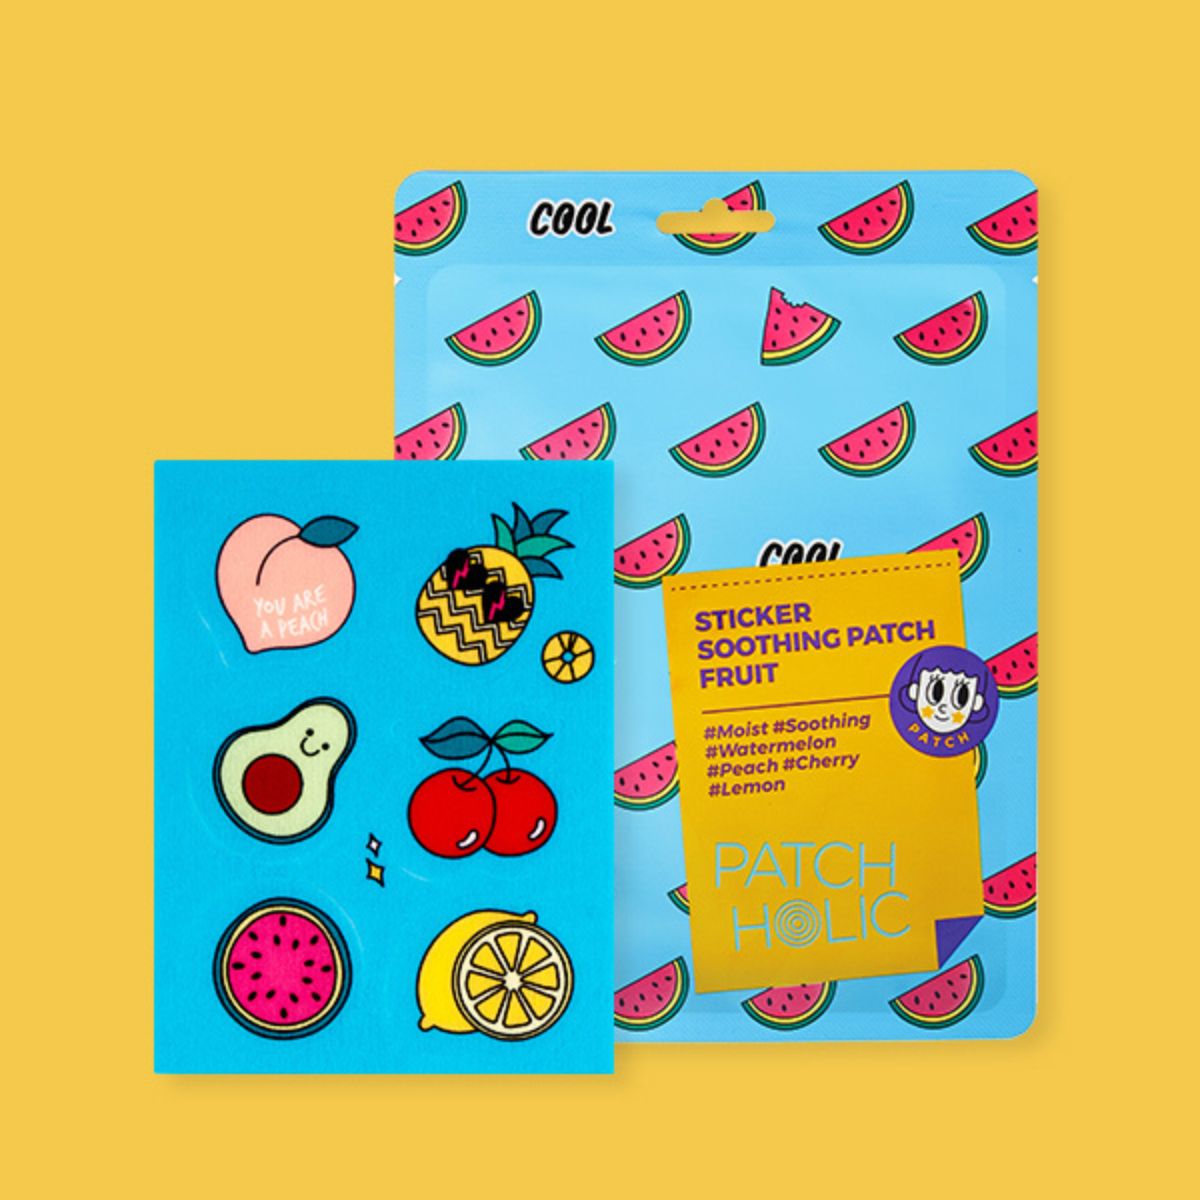 Sticker Soothing Patch Fruit